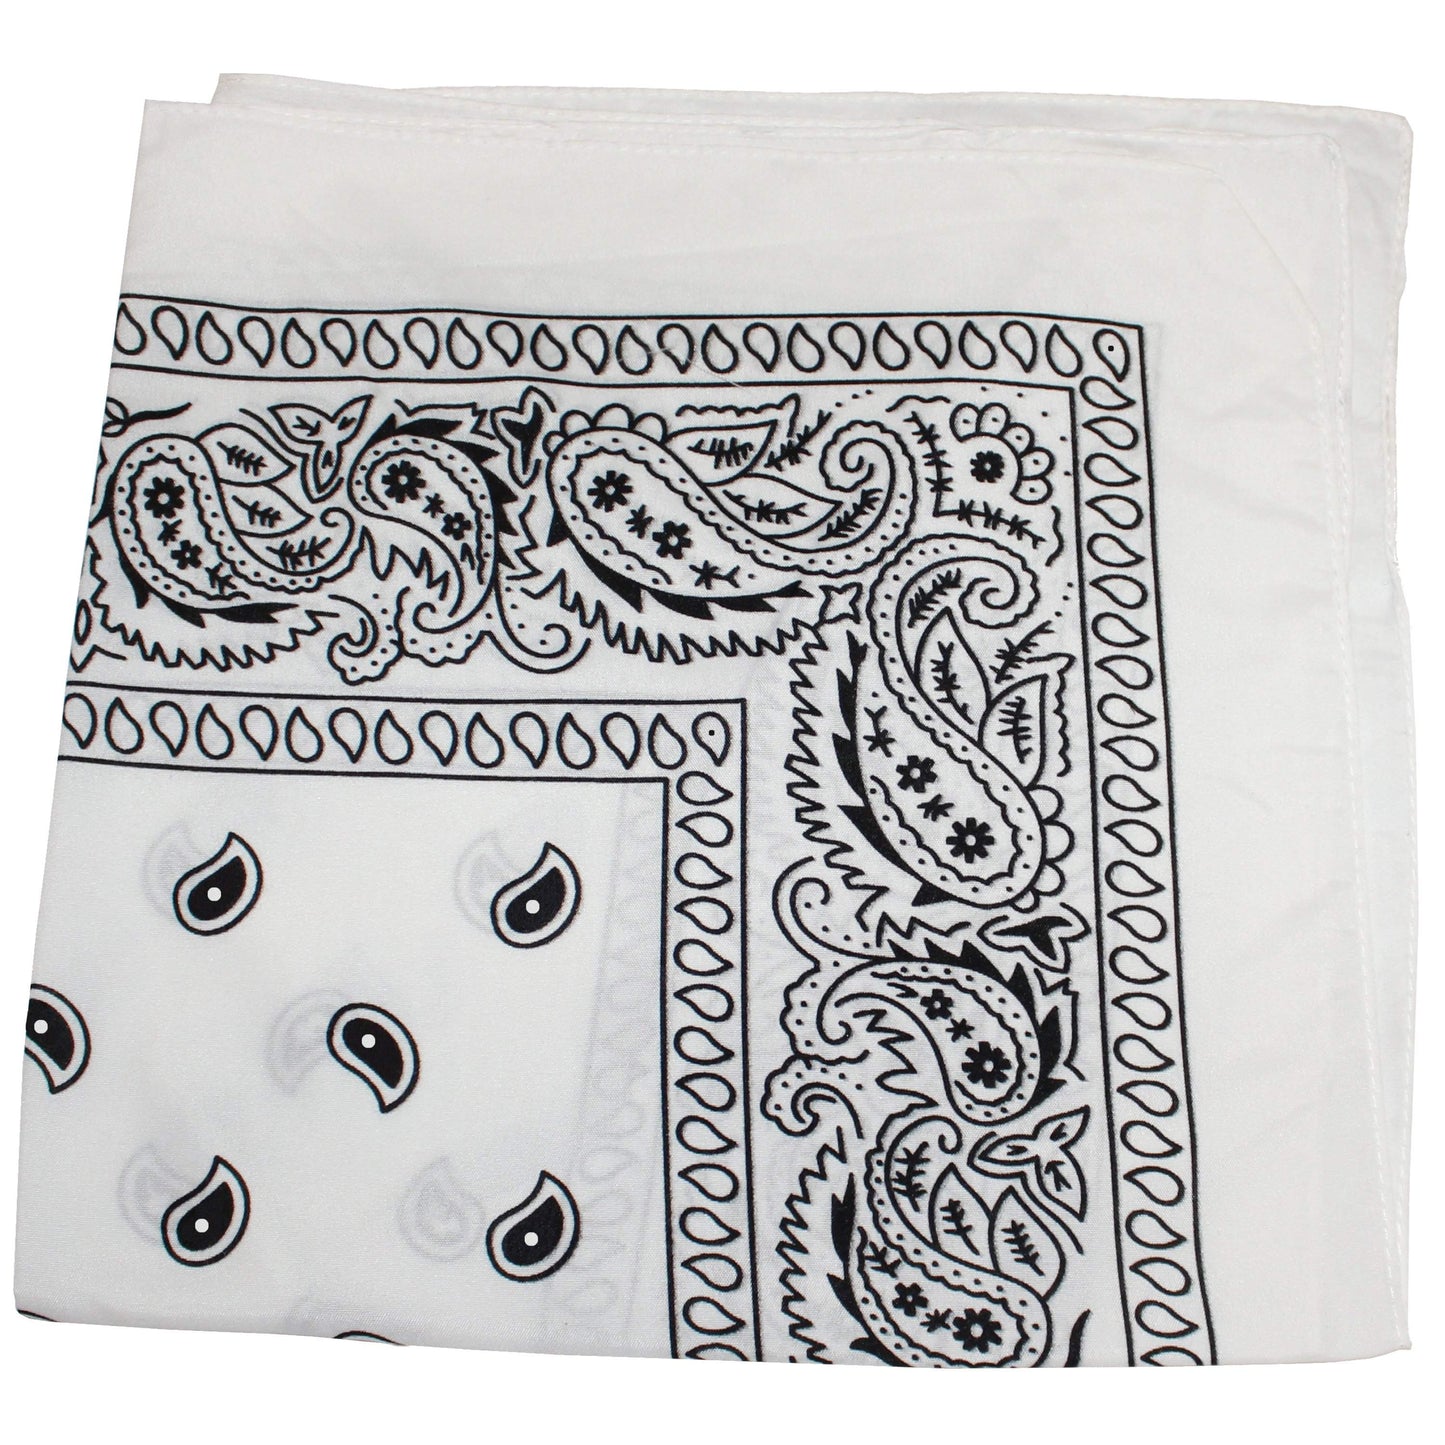 Unibasic Extra Large Polyester Paisley Bandanas 27 x 27 In - 6 Pack - Party and Decoration